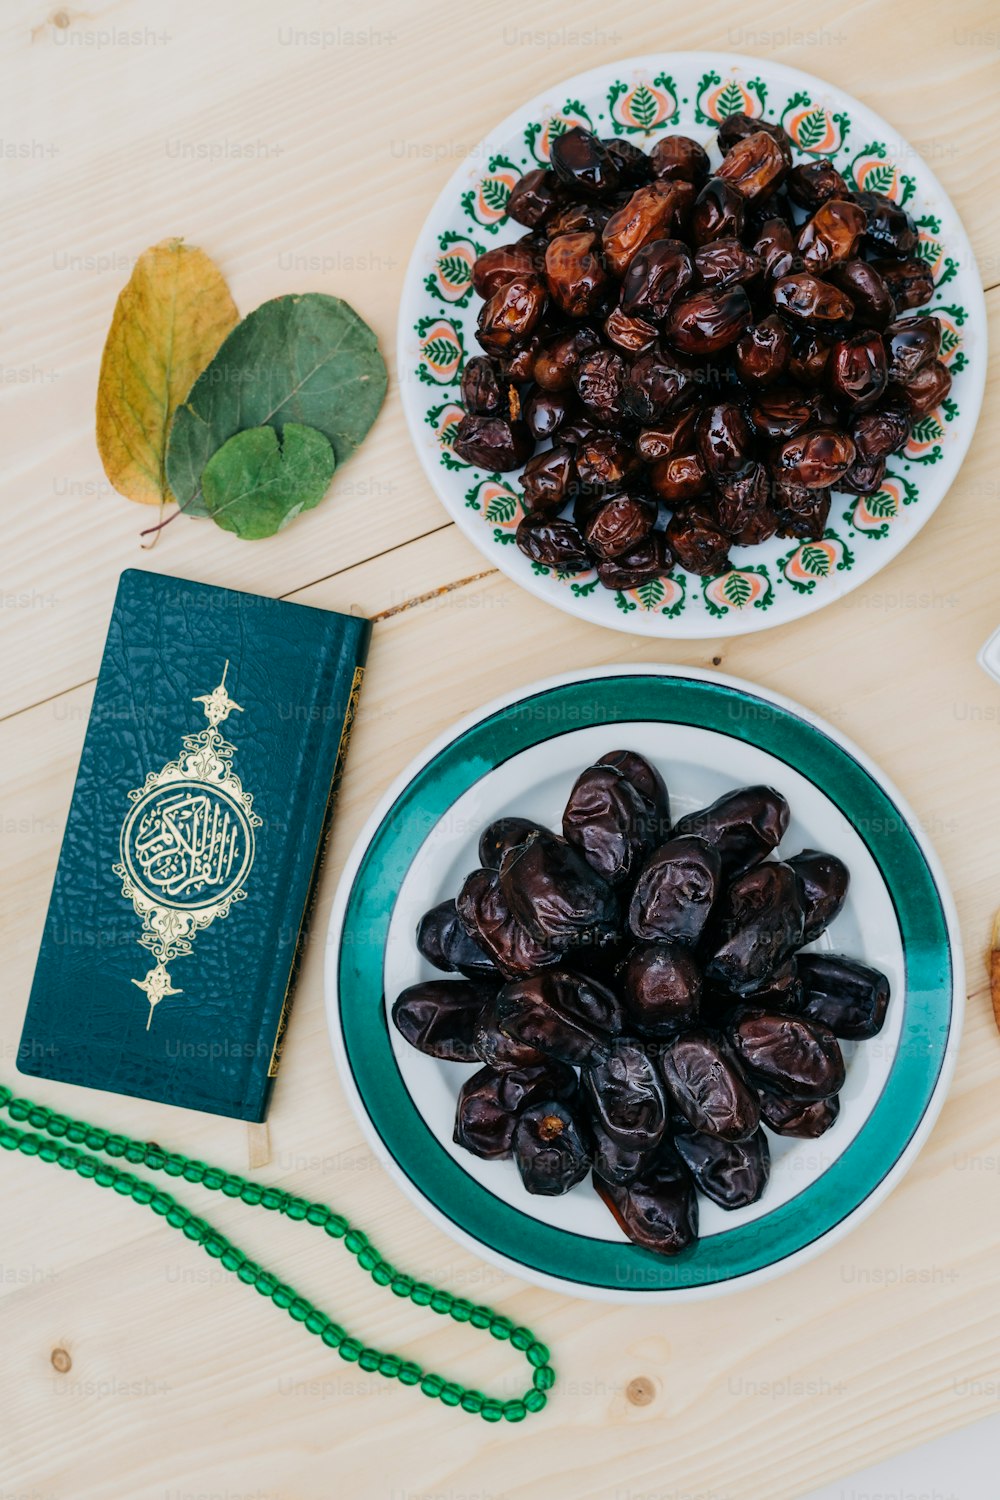 a plate of raisins next to a green book on a table